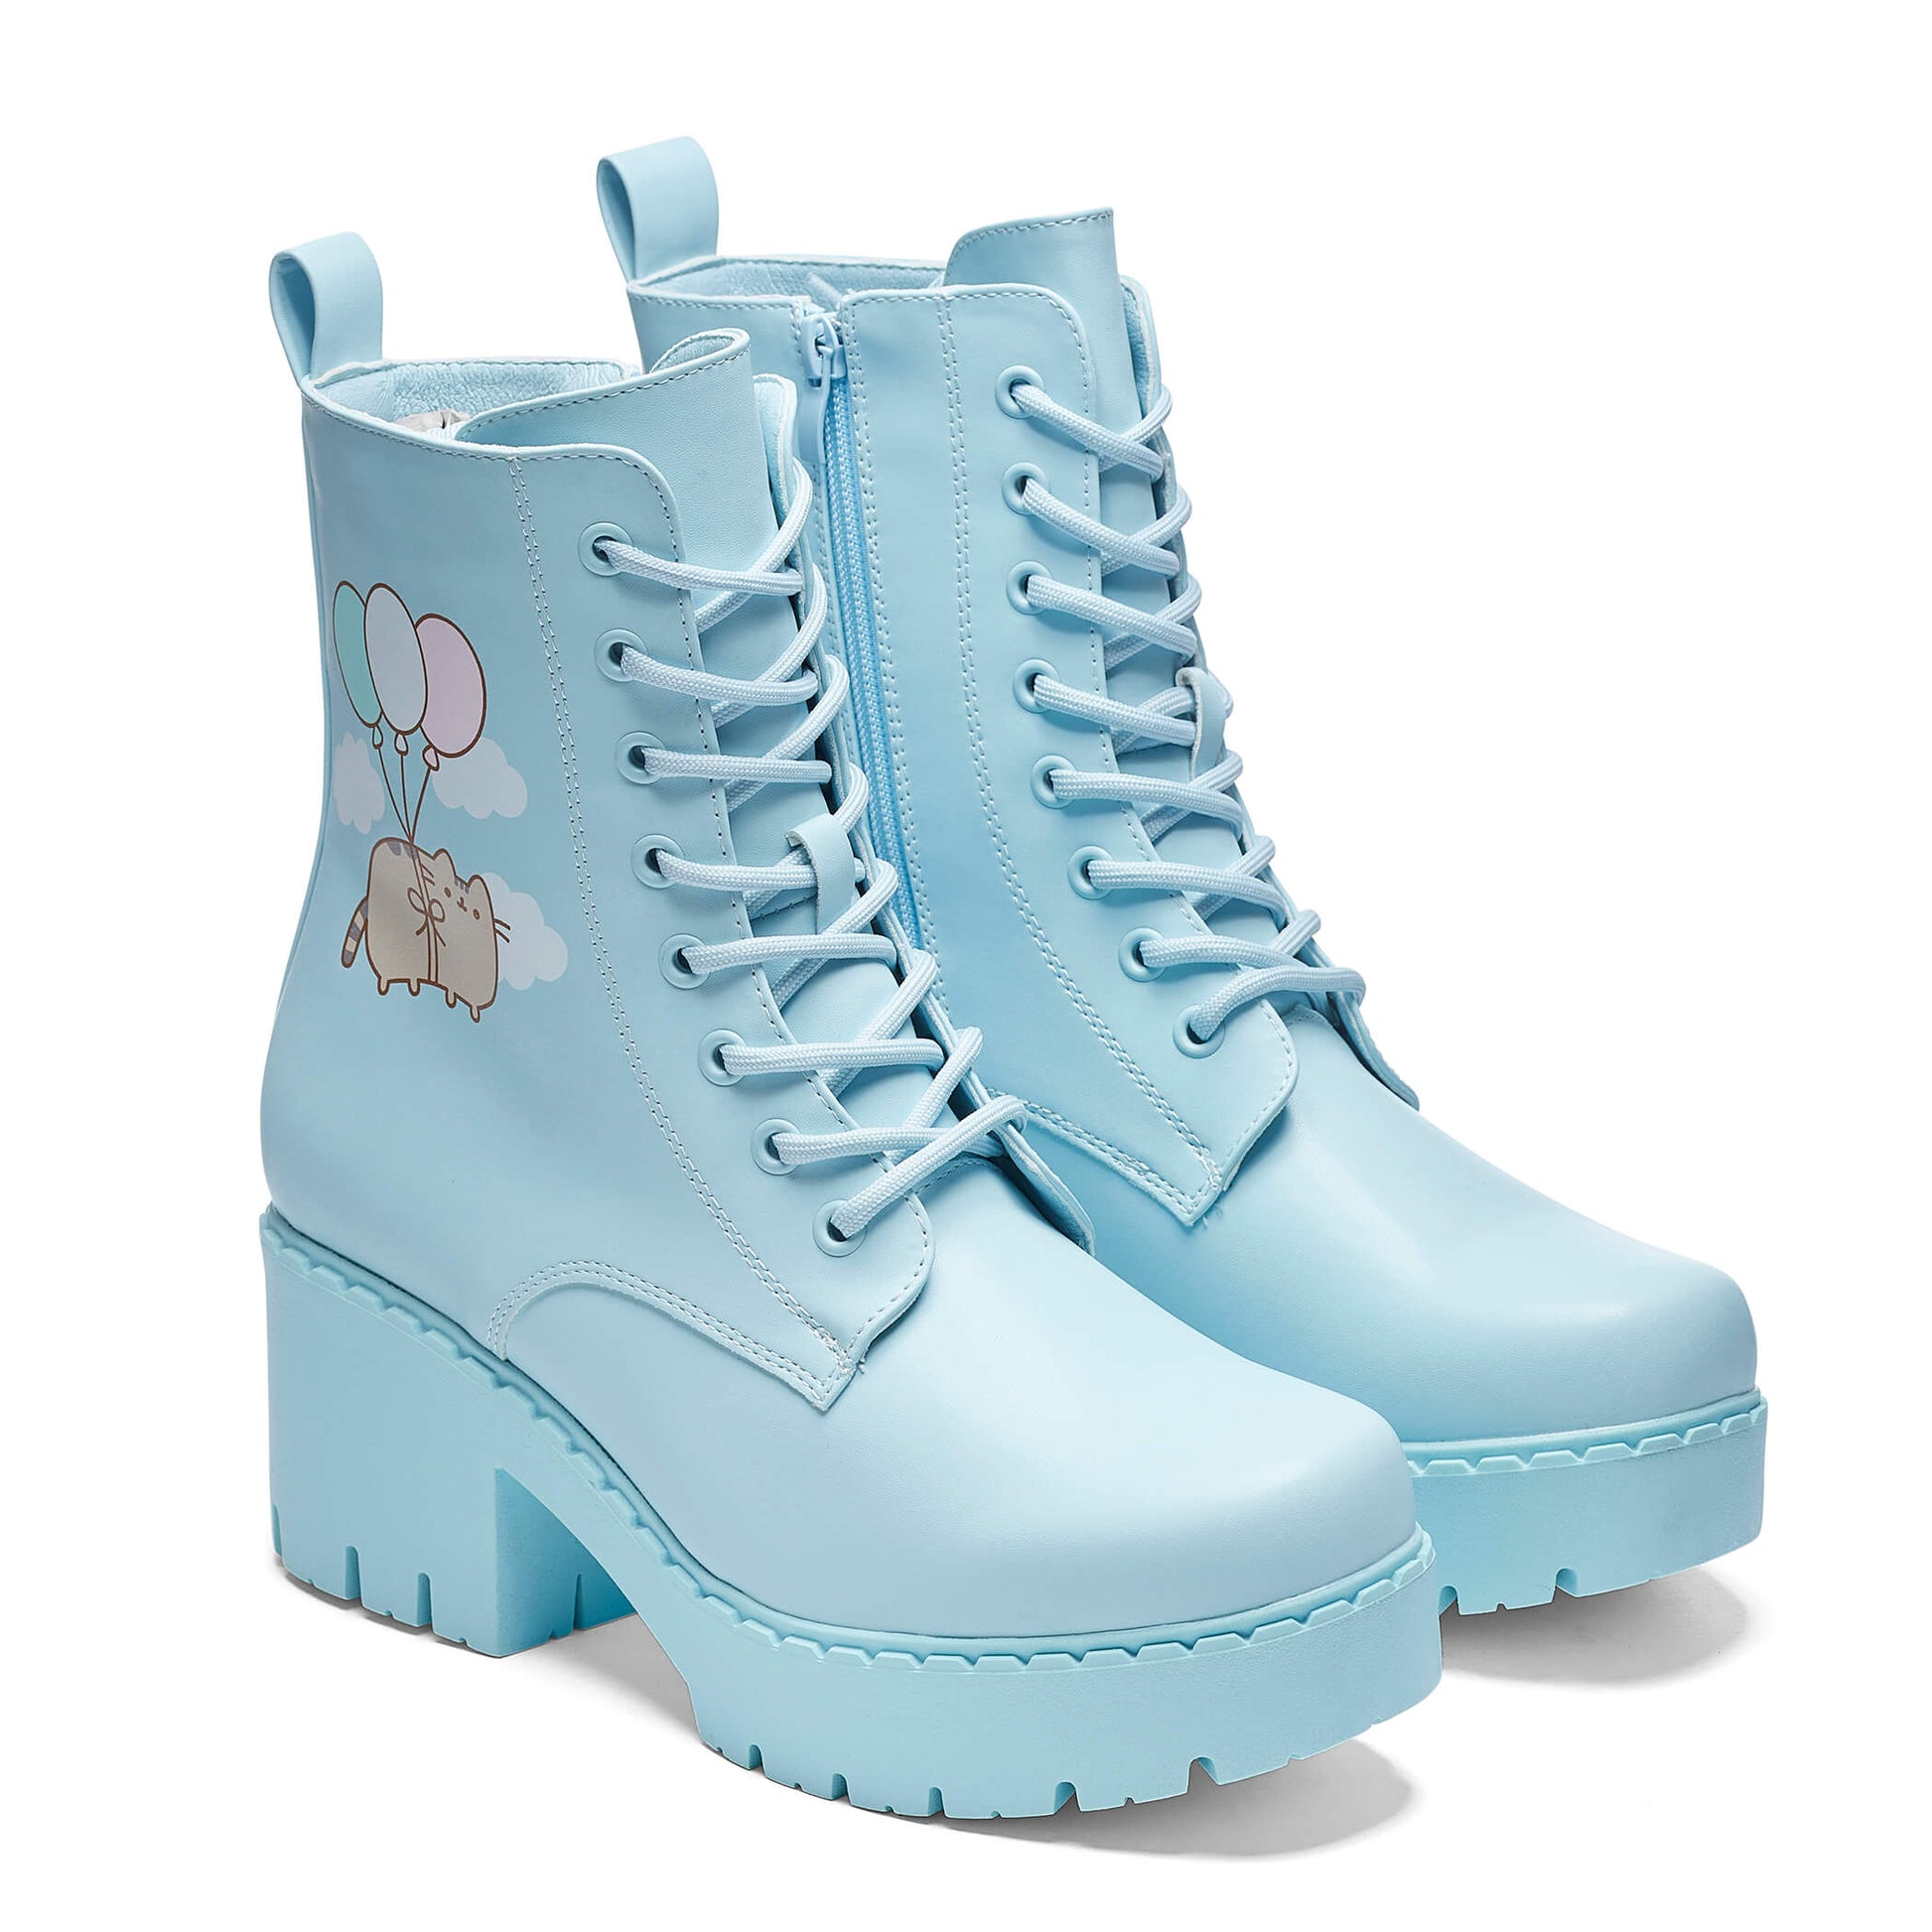 Flying Pusheen Sky Boots - Ankle Boots - KOI Footwear - Blue - Three-Quarter View